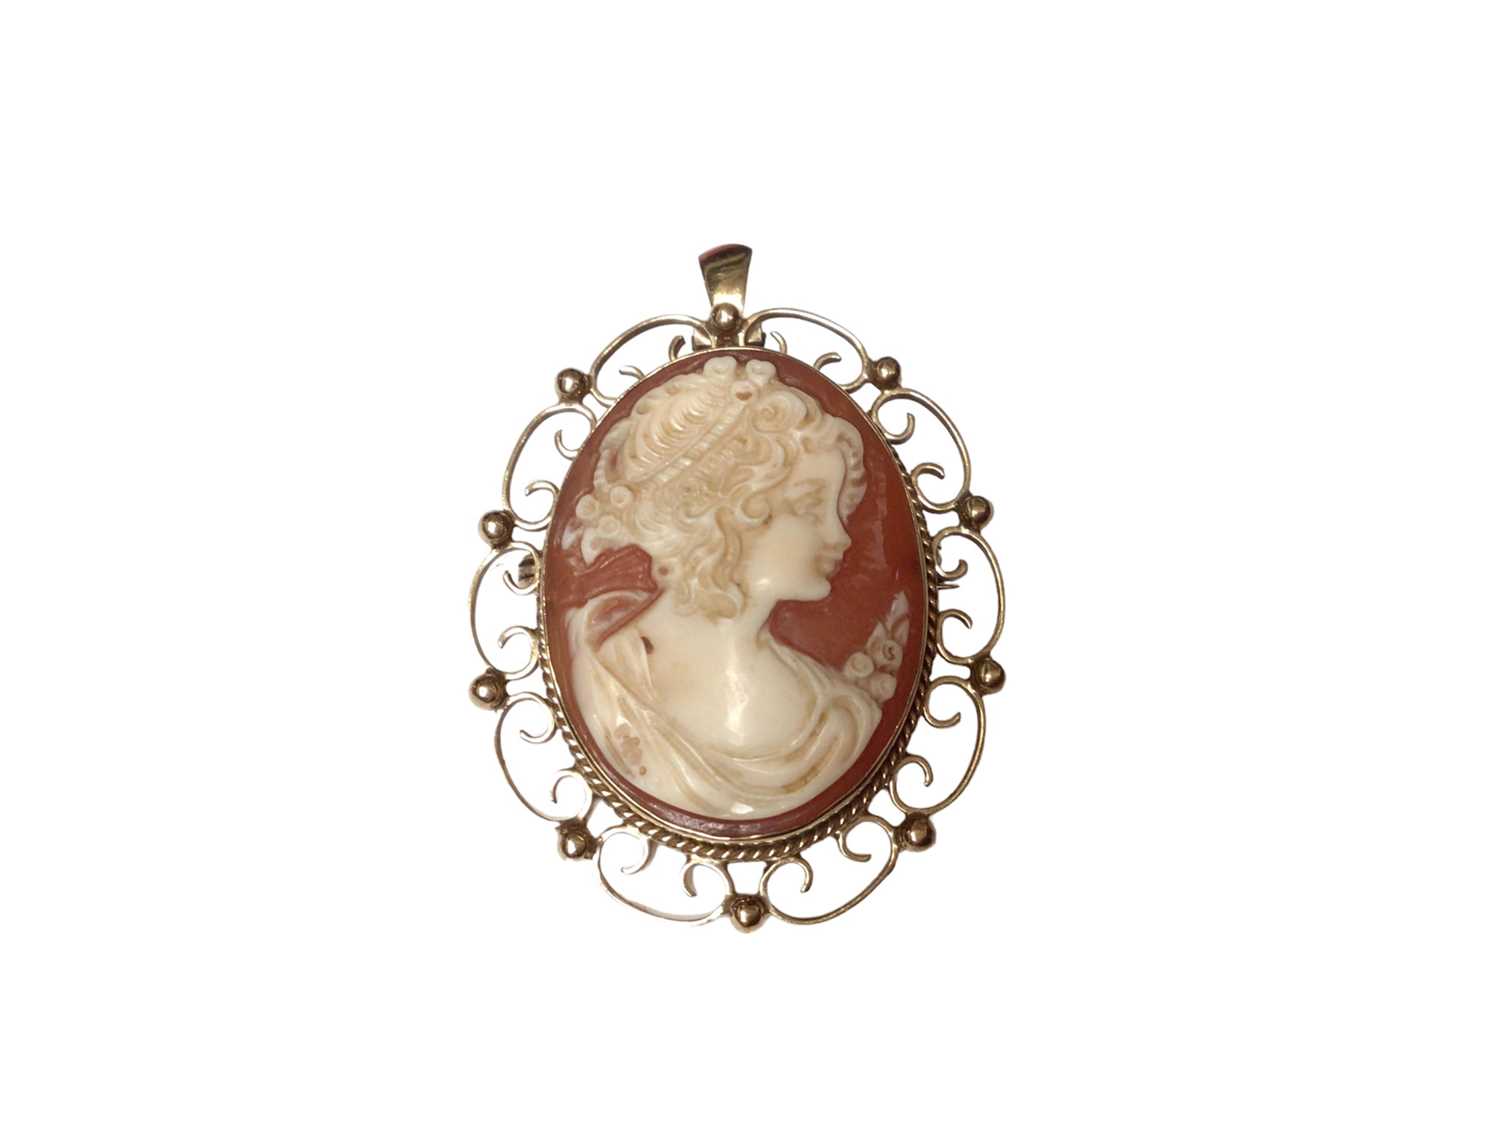 Carved shell cameo pendant/brooch in 9ct gold mount, 45mm.